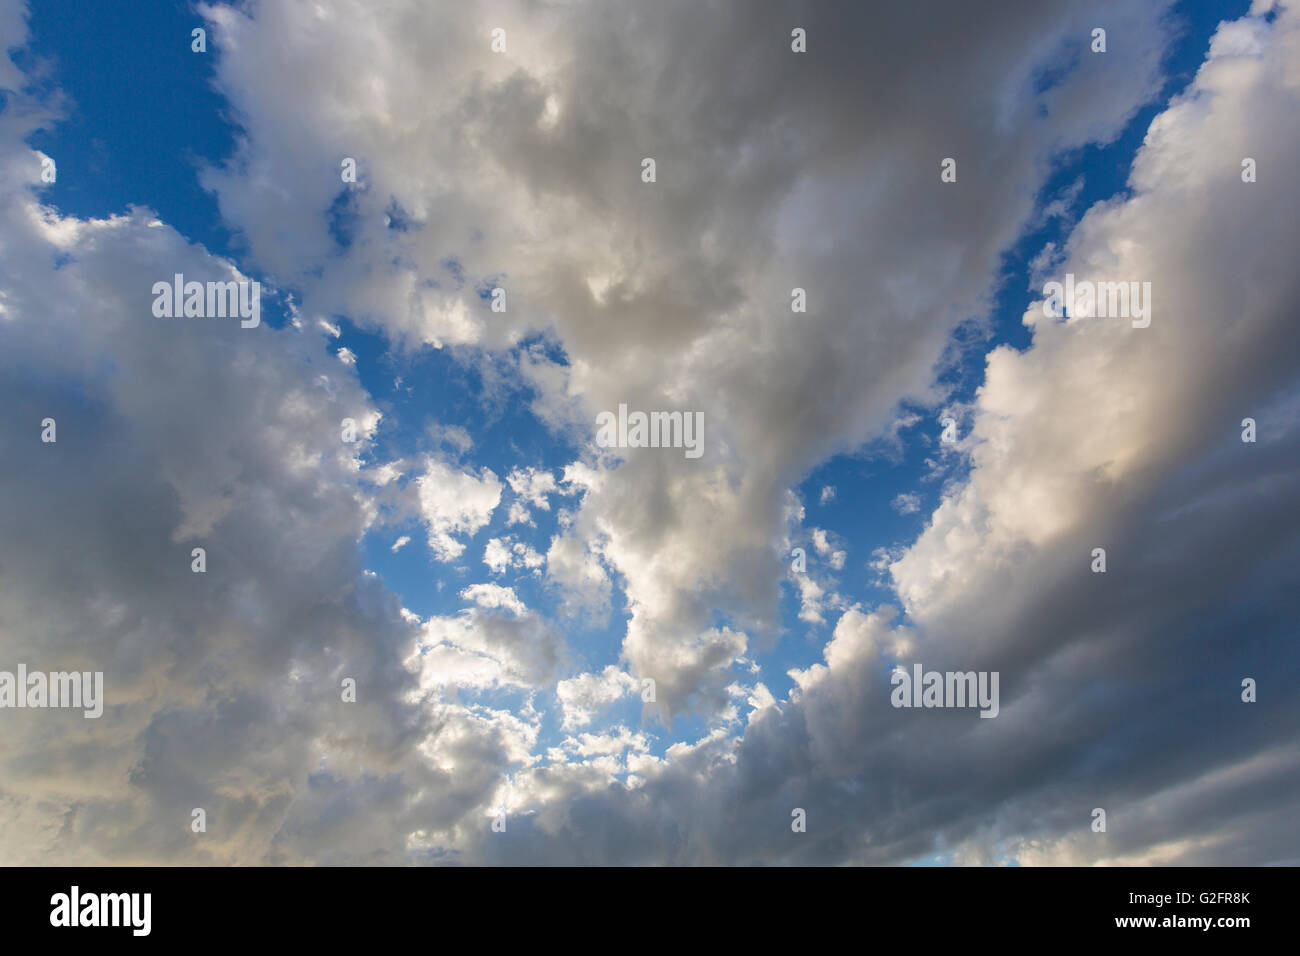 Dramatic sky and cloud formations over Venice Florida Stock Photo